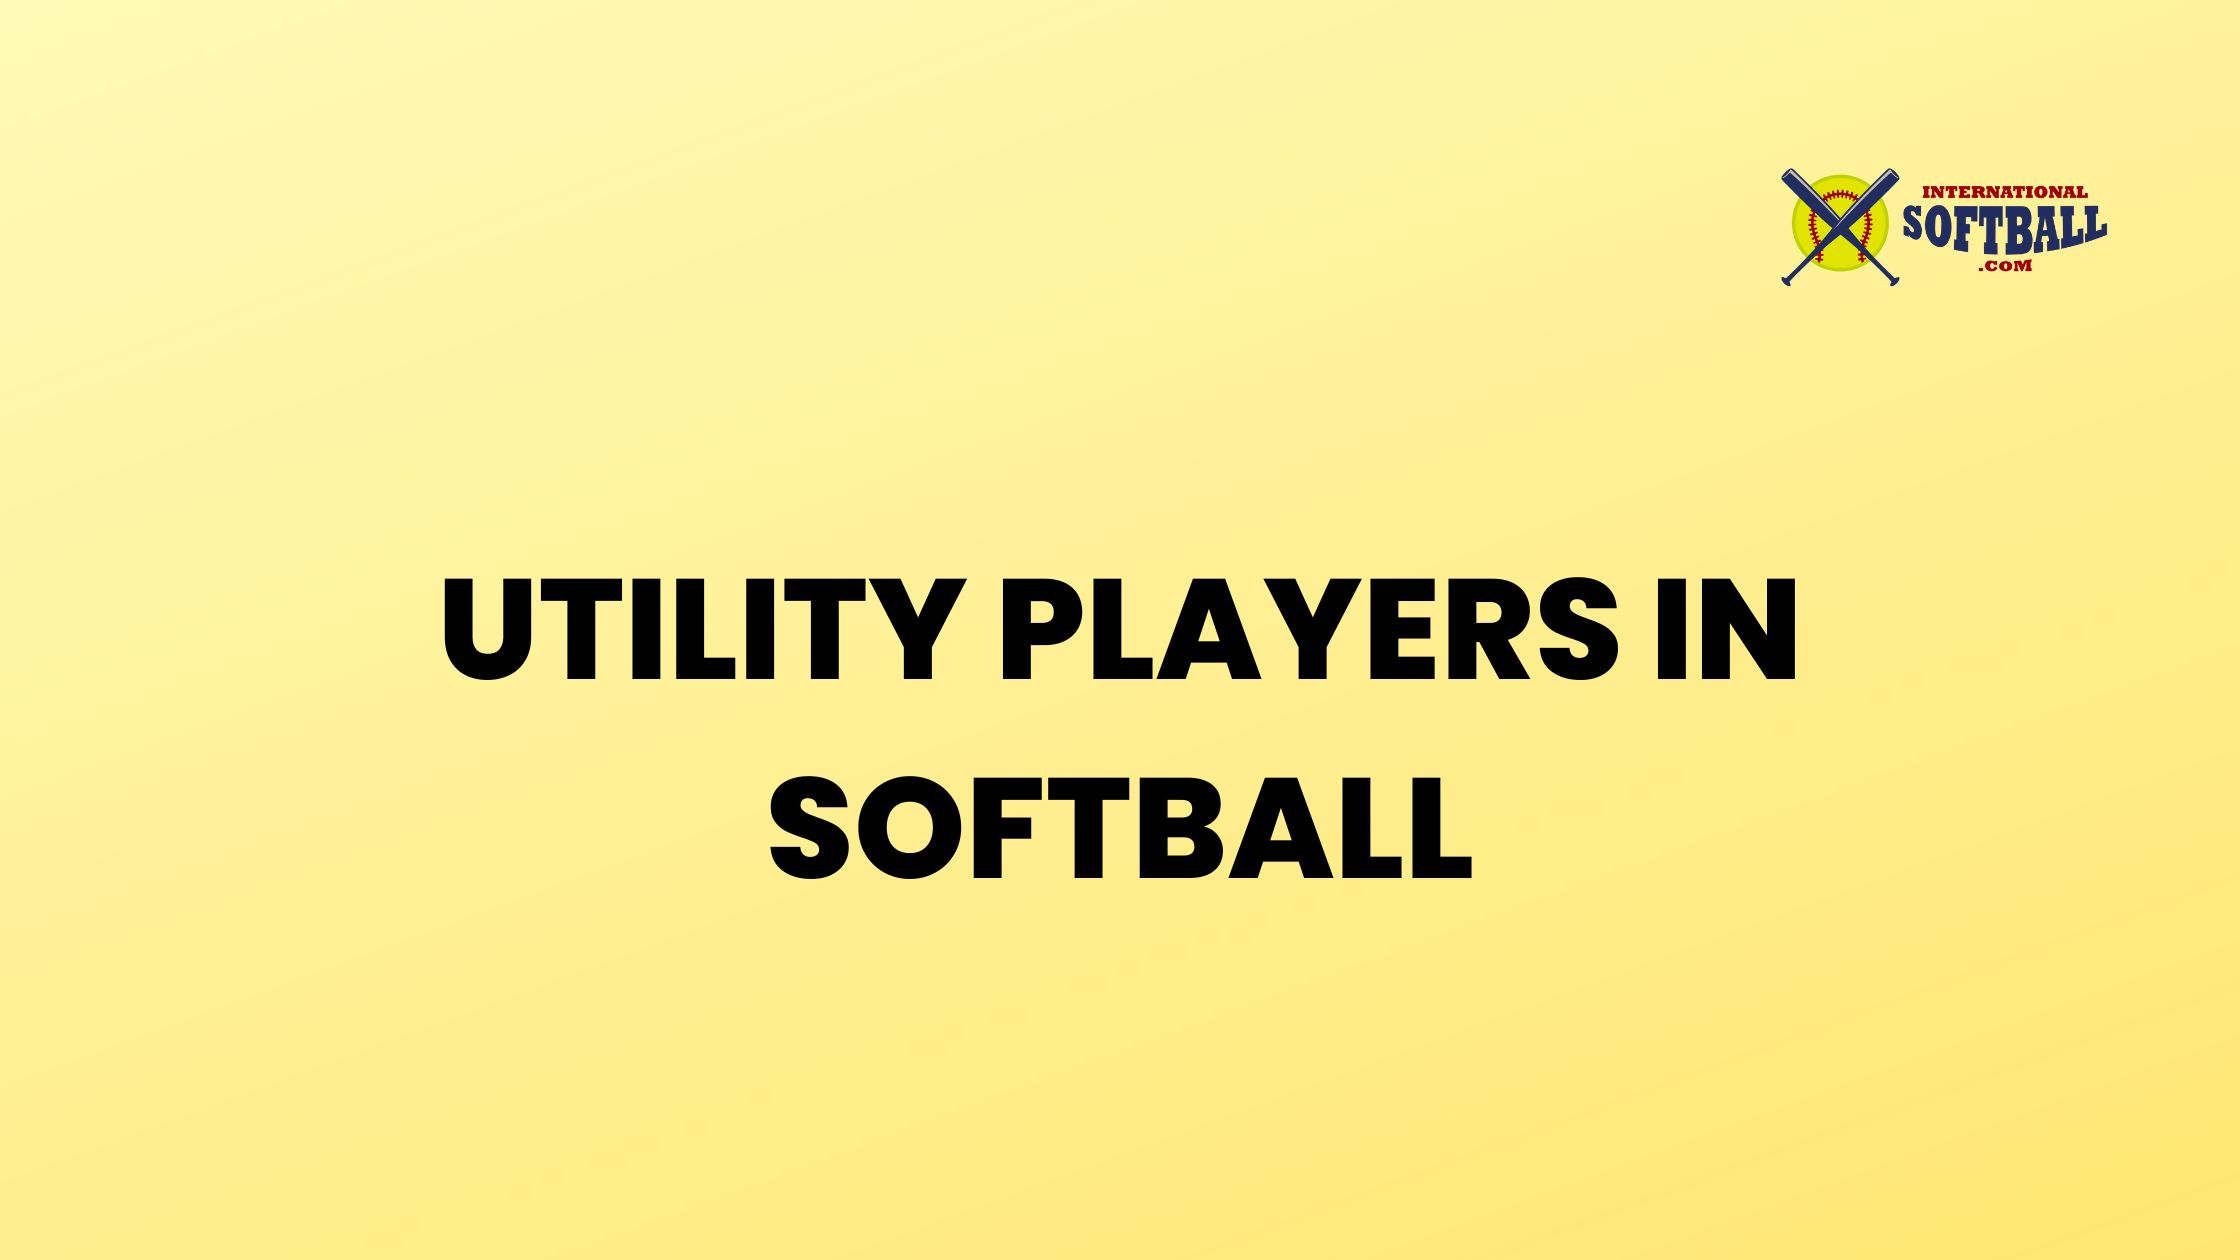 UTILITY PLAYERS IN SOFTBALL